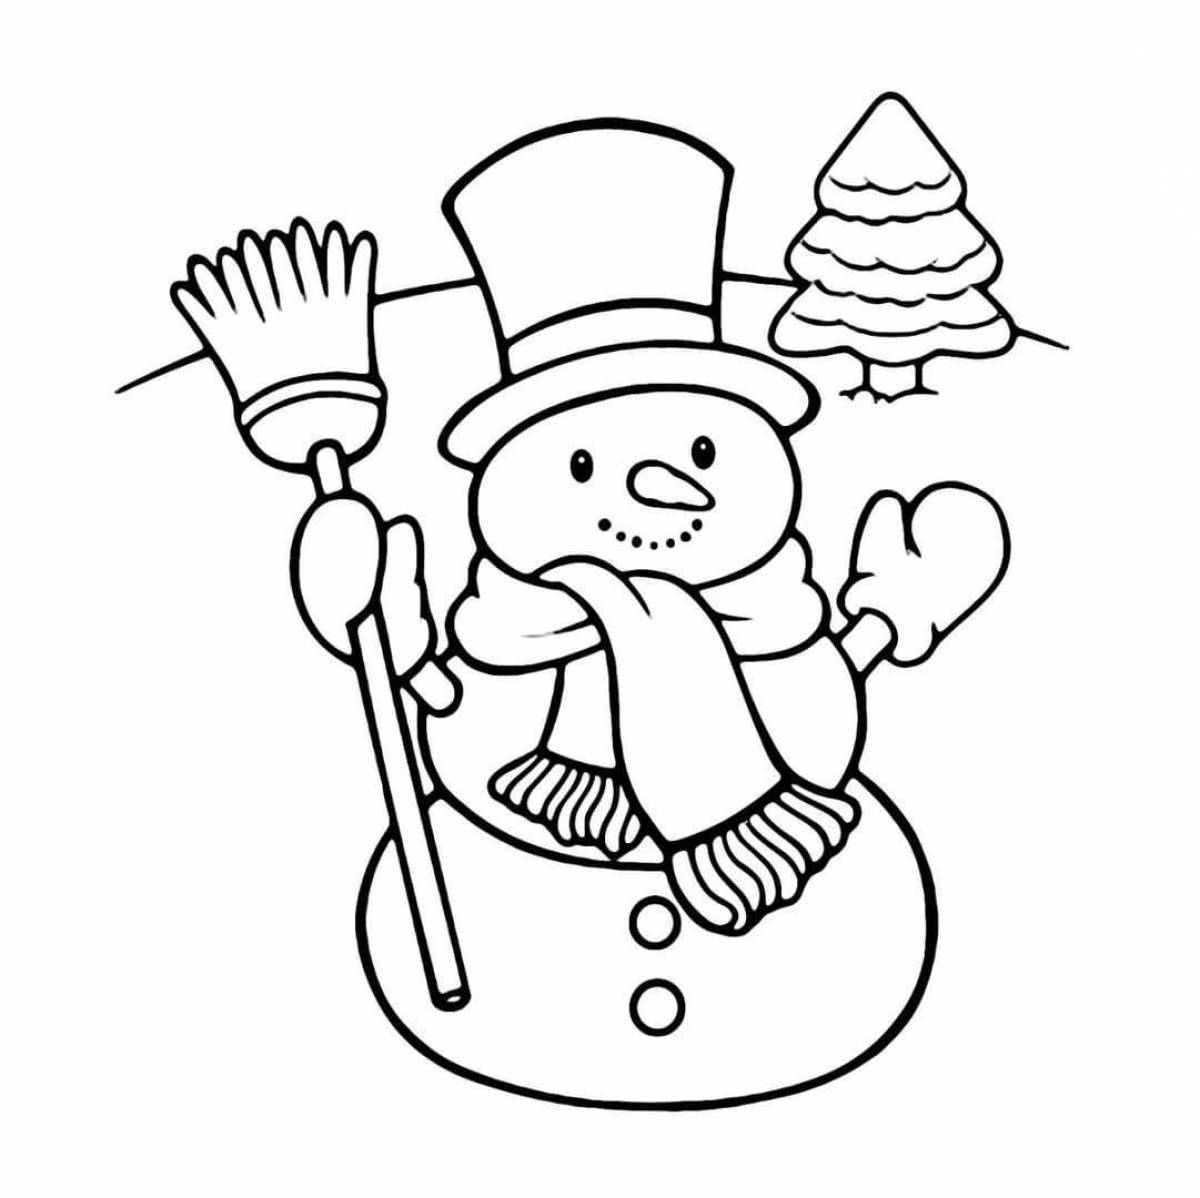 Glowing snowman coloring page for kids